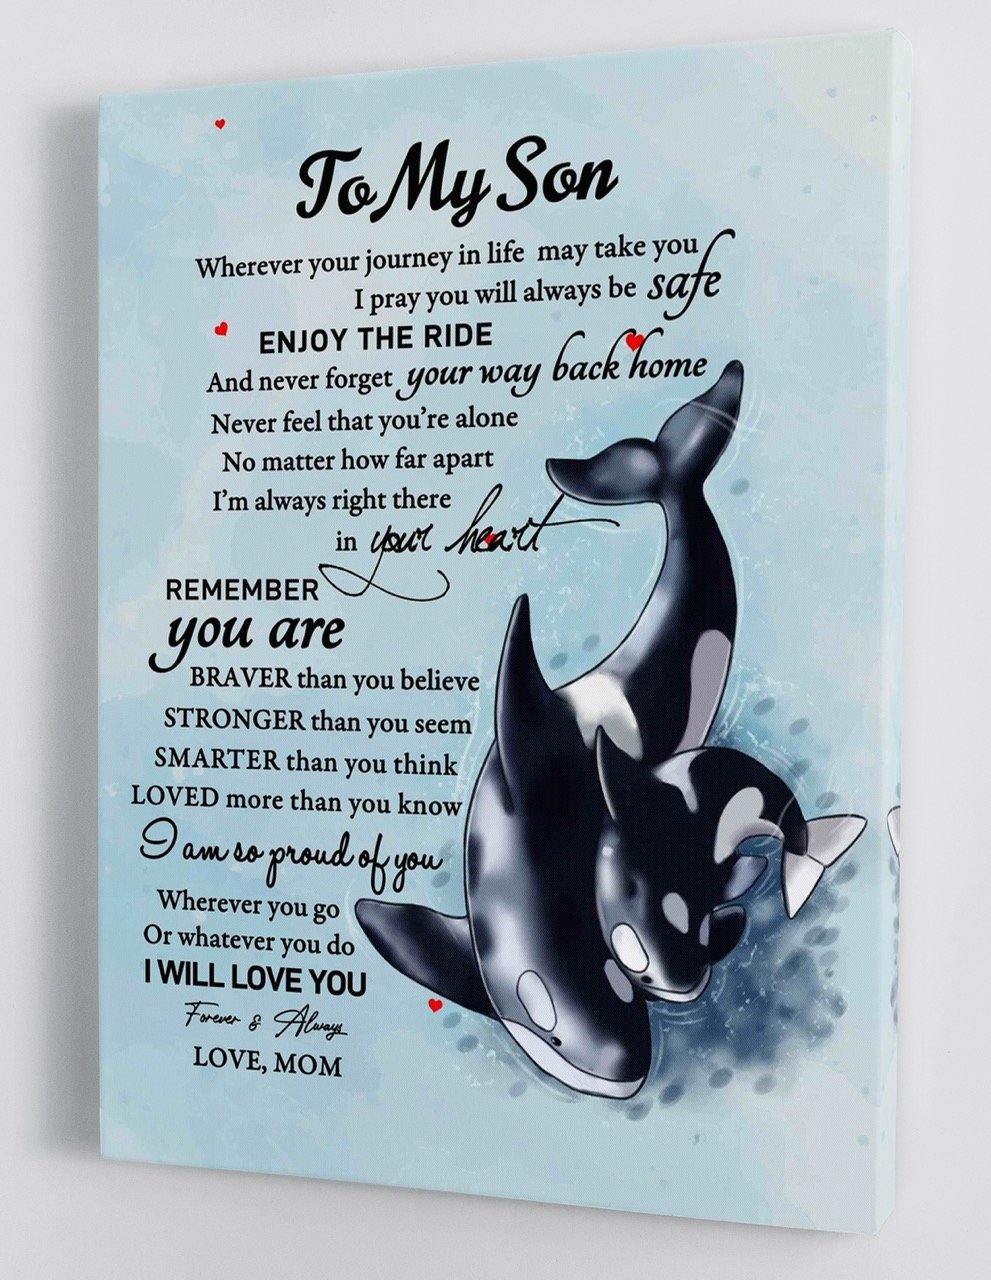 To My Son - From Mom - Framed Canvas Gift MS027 - DivesArt LLC